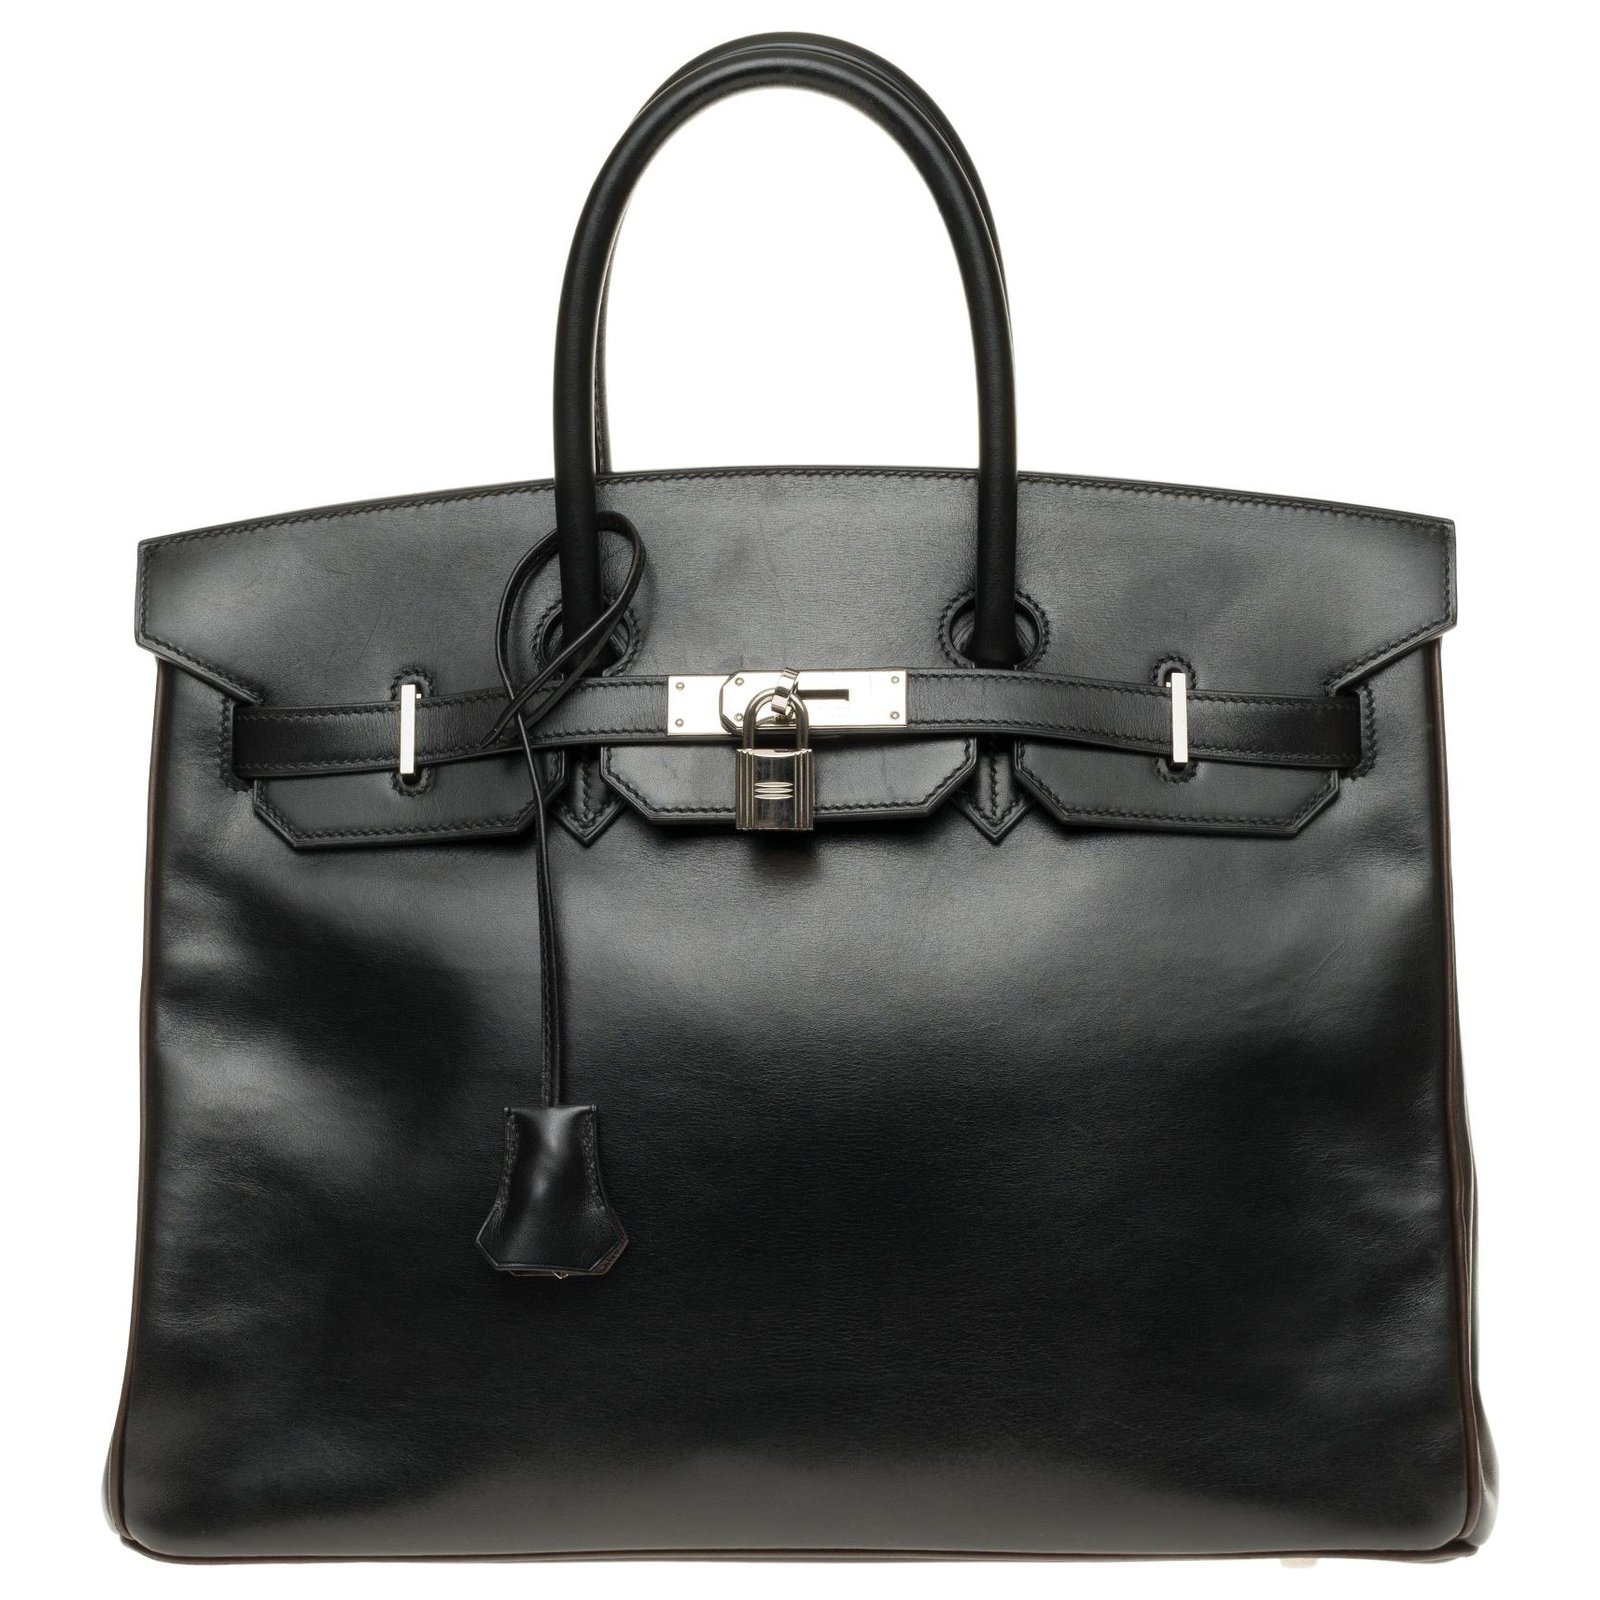 Hermès HERMES BIRKIN 35 Special order in two-tone leather box